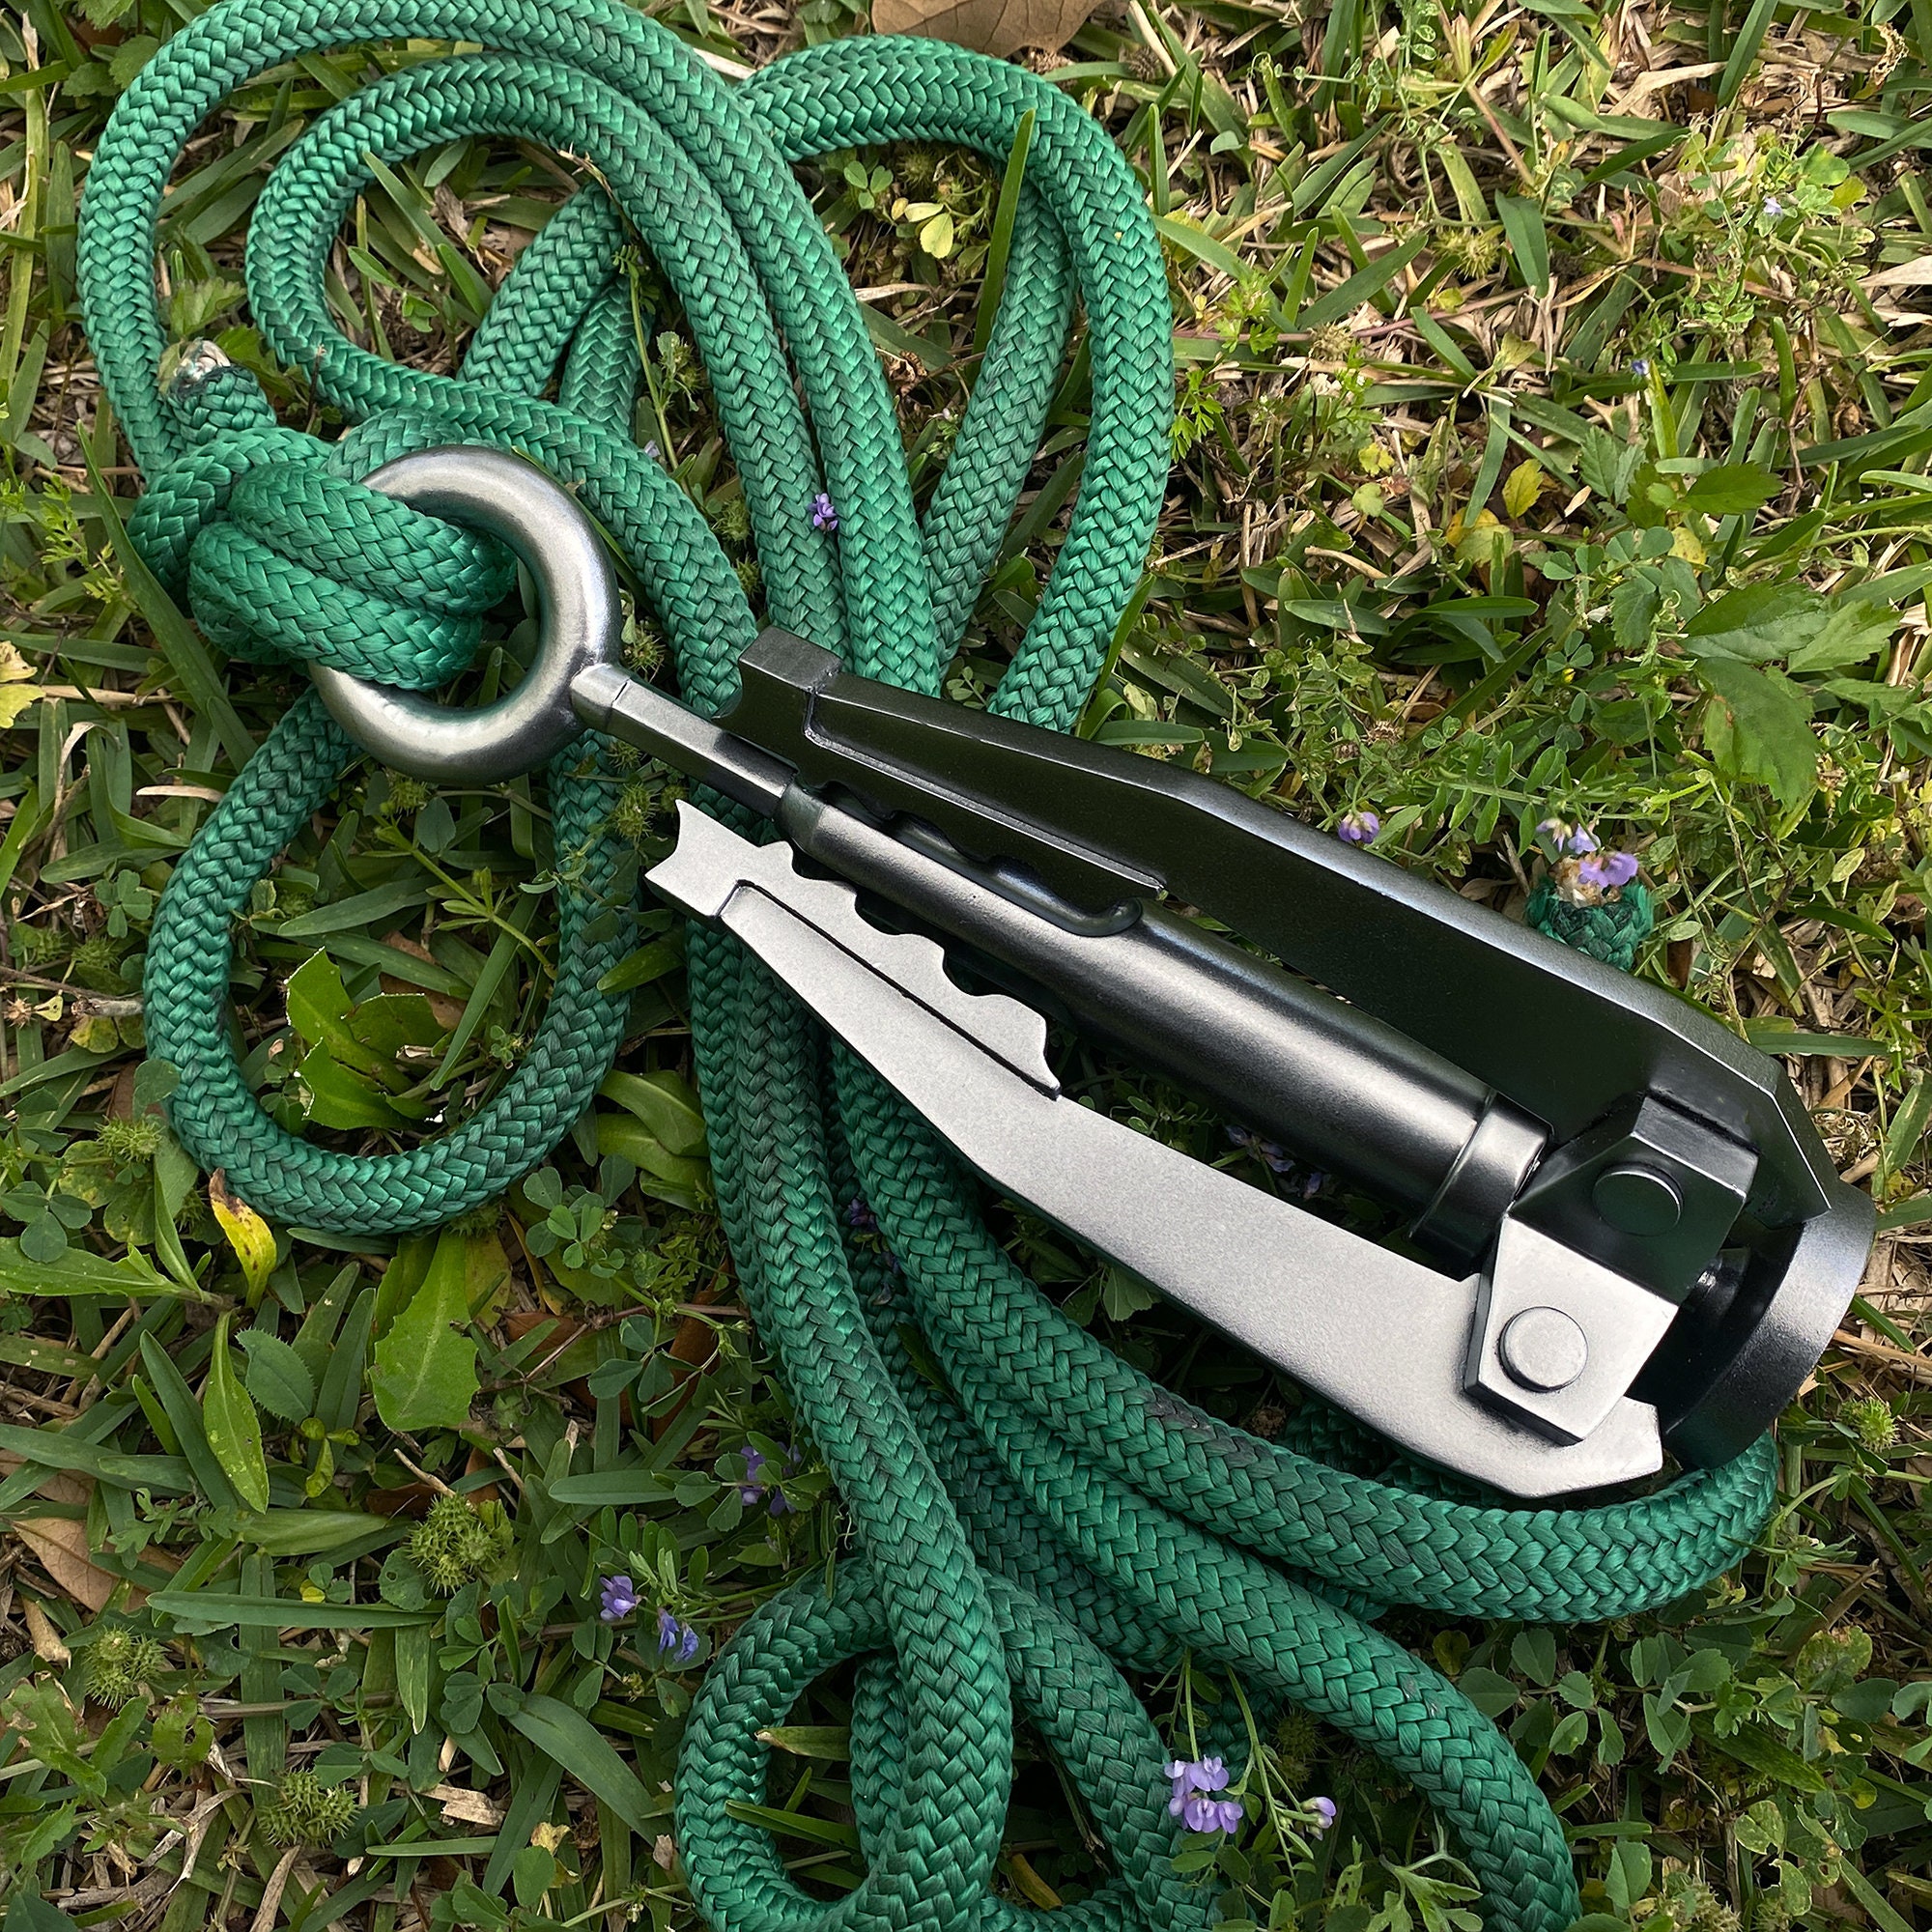 Grappling Hook and Climbing Pick Prop -  Norway